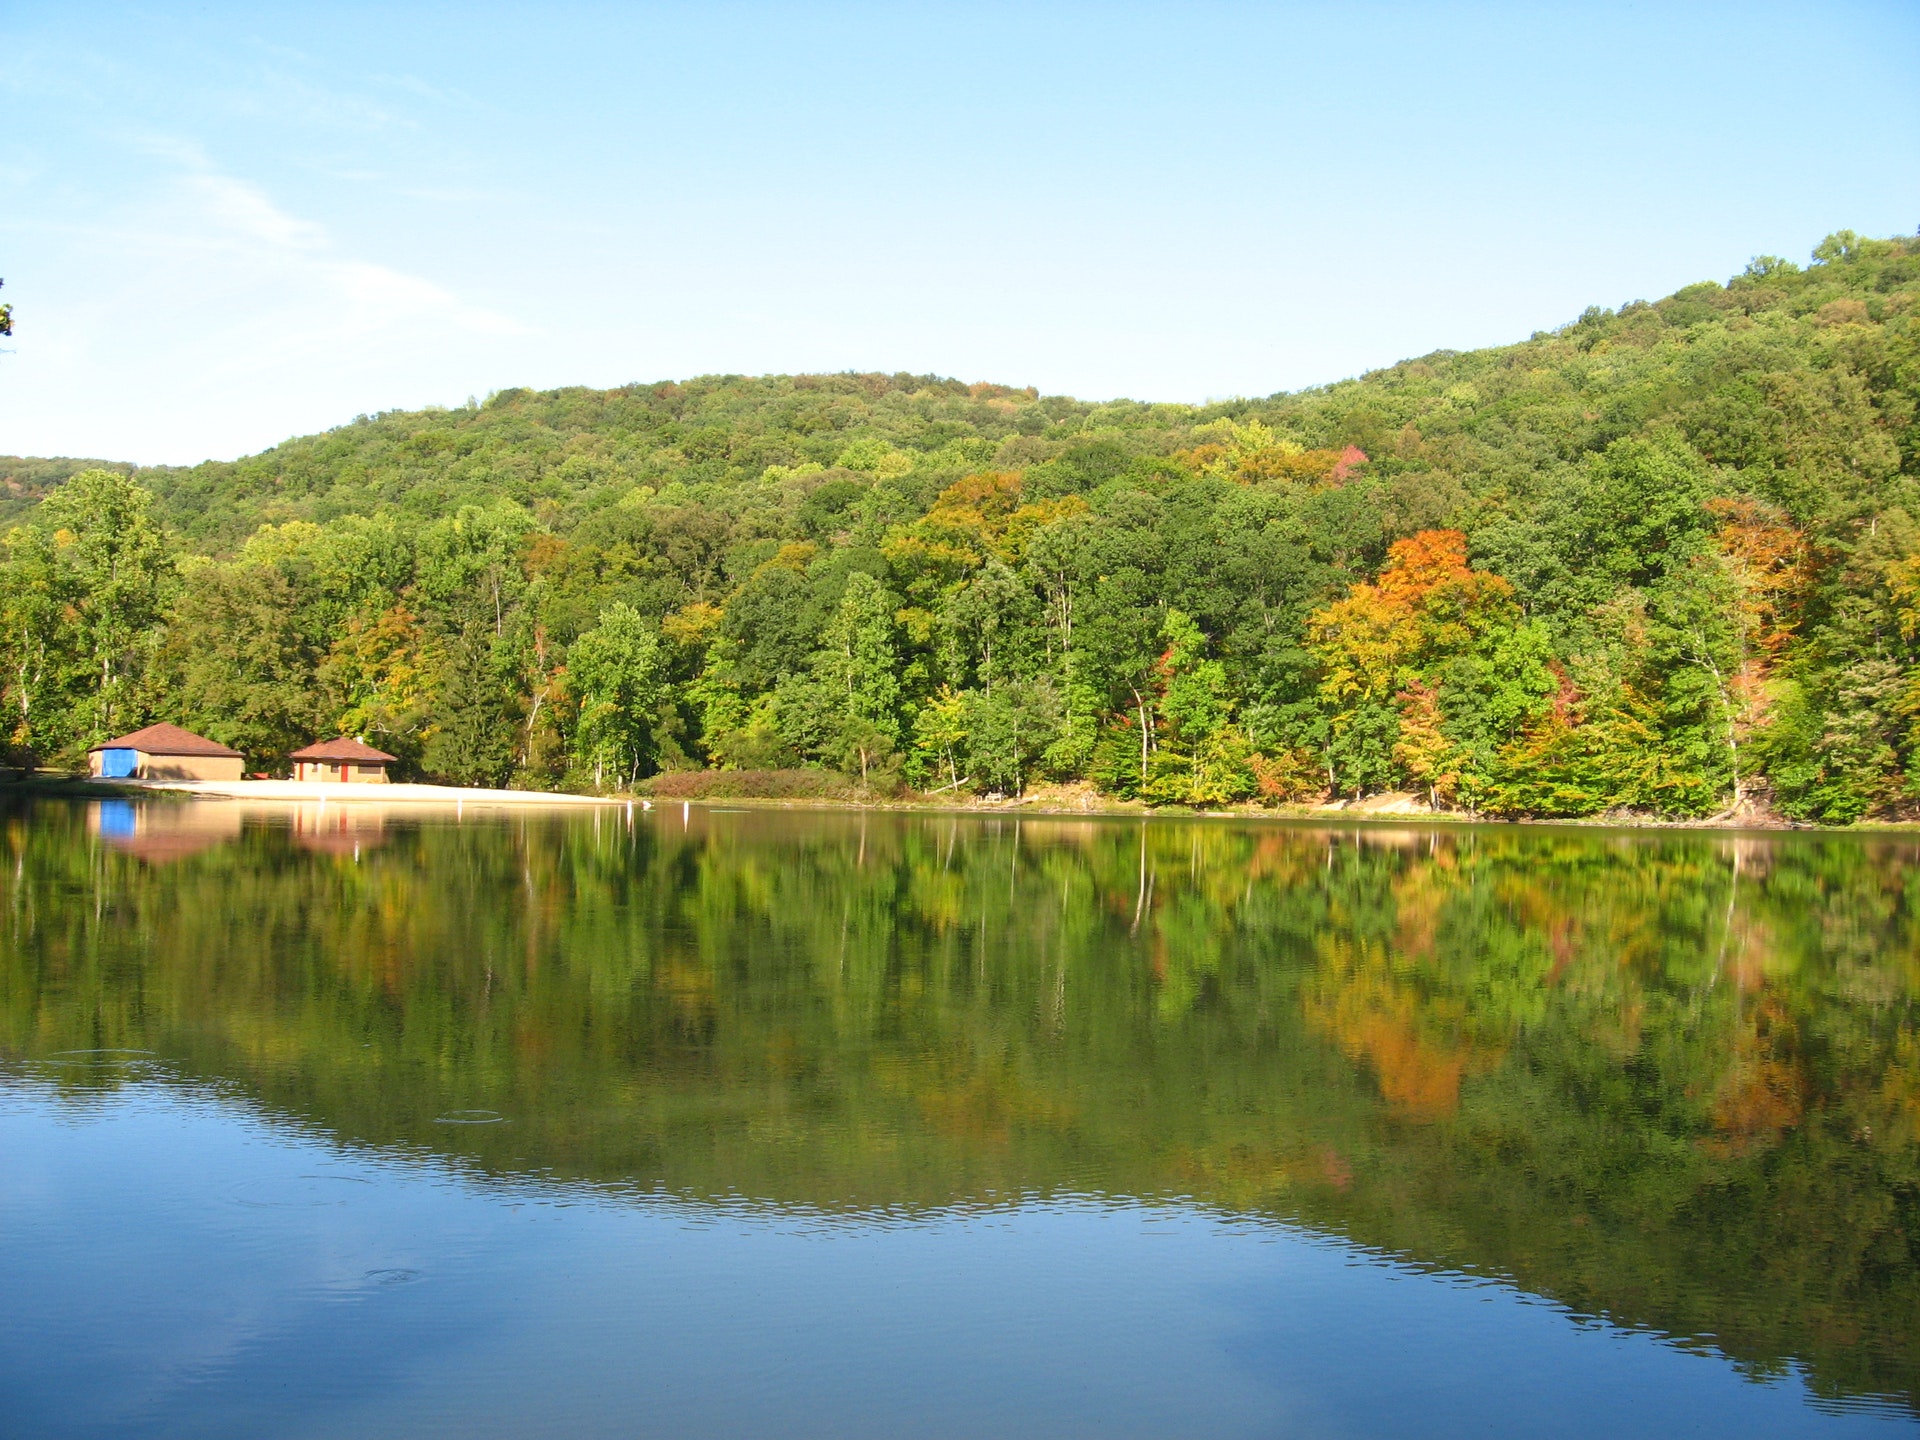 Pike Lake State Park, an Ohio State Park located near Chillicothe